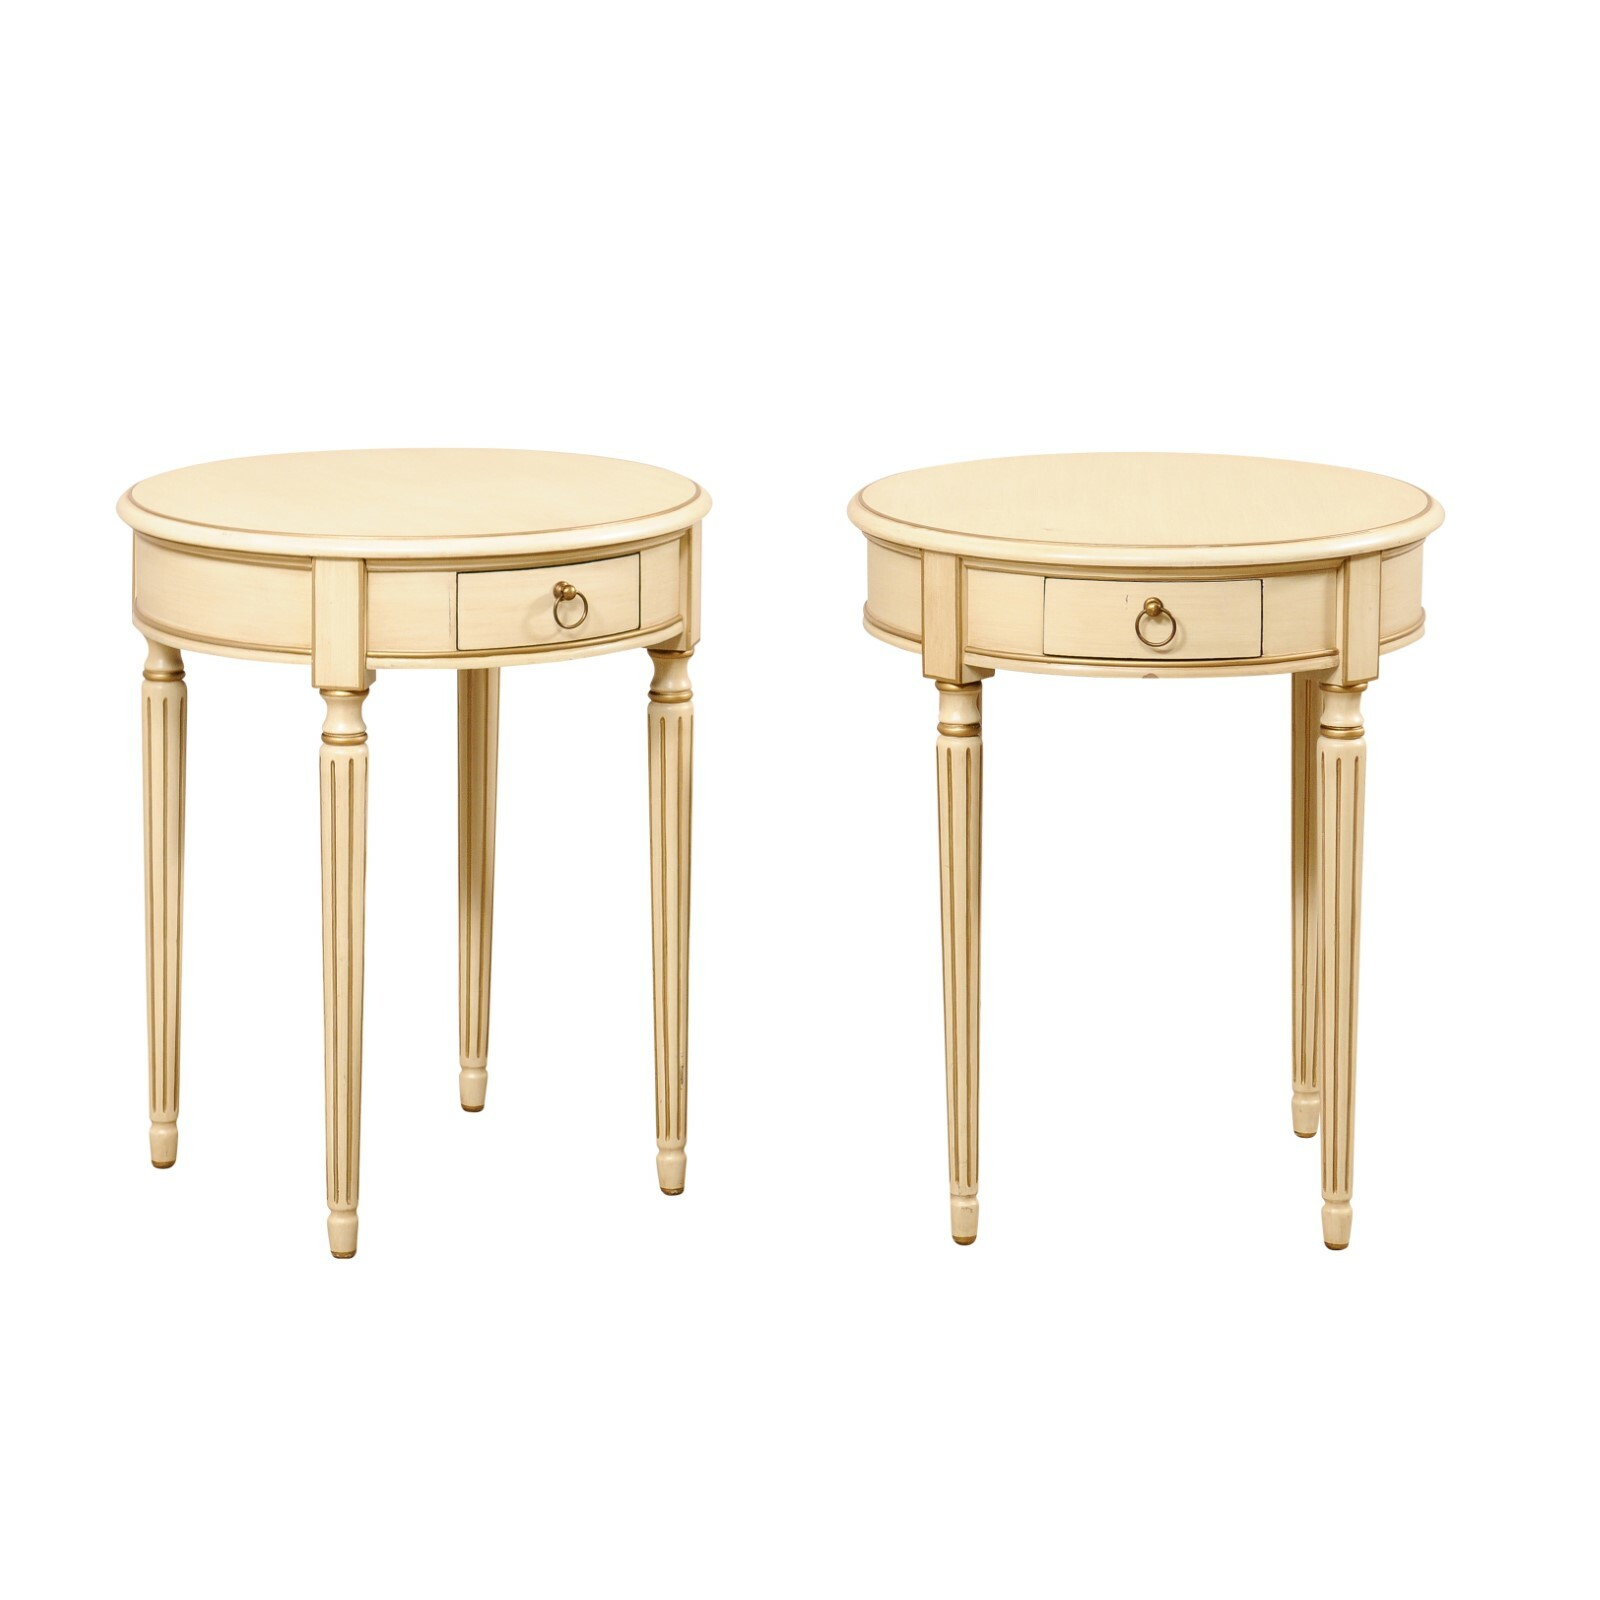 Pair Round End Tables, Cream w/Gold Accents